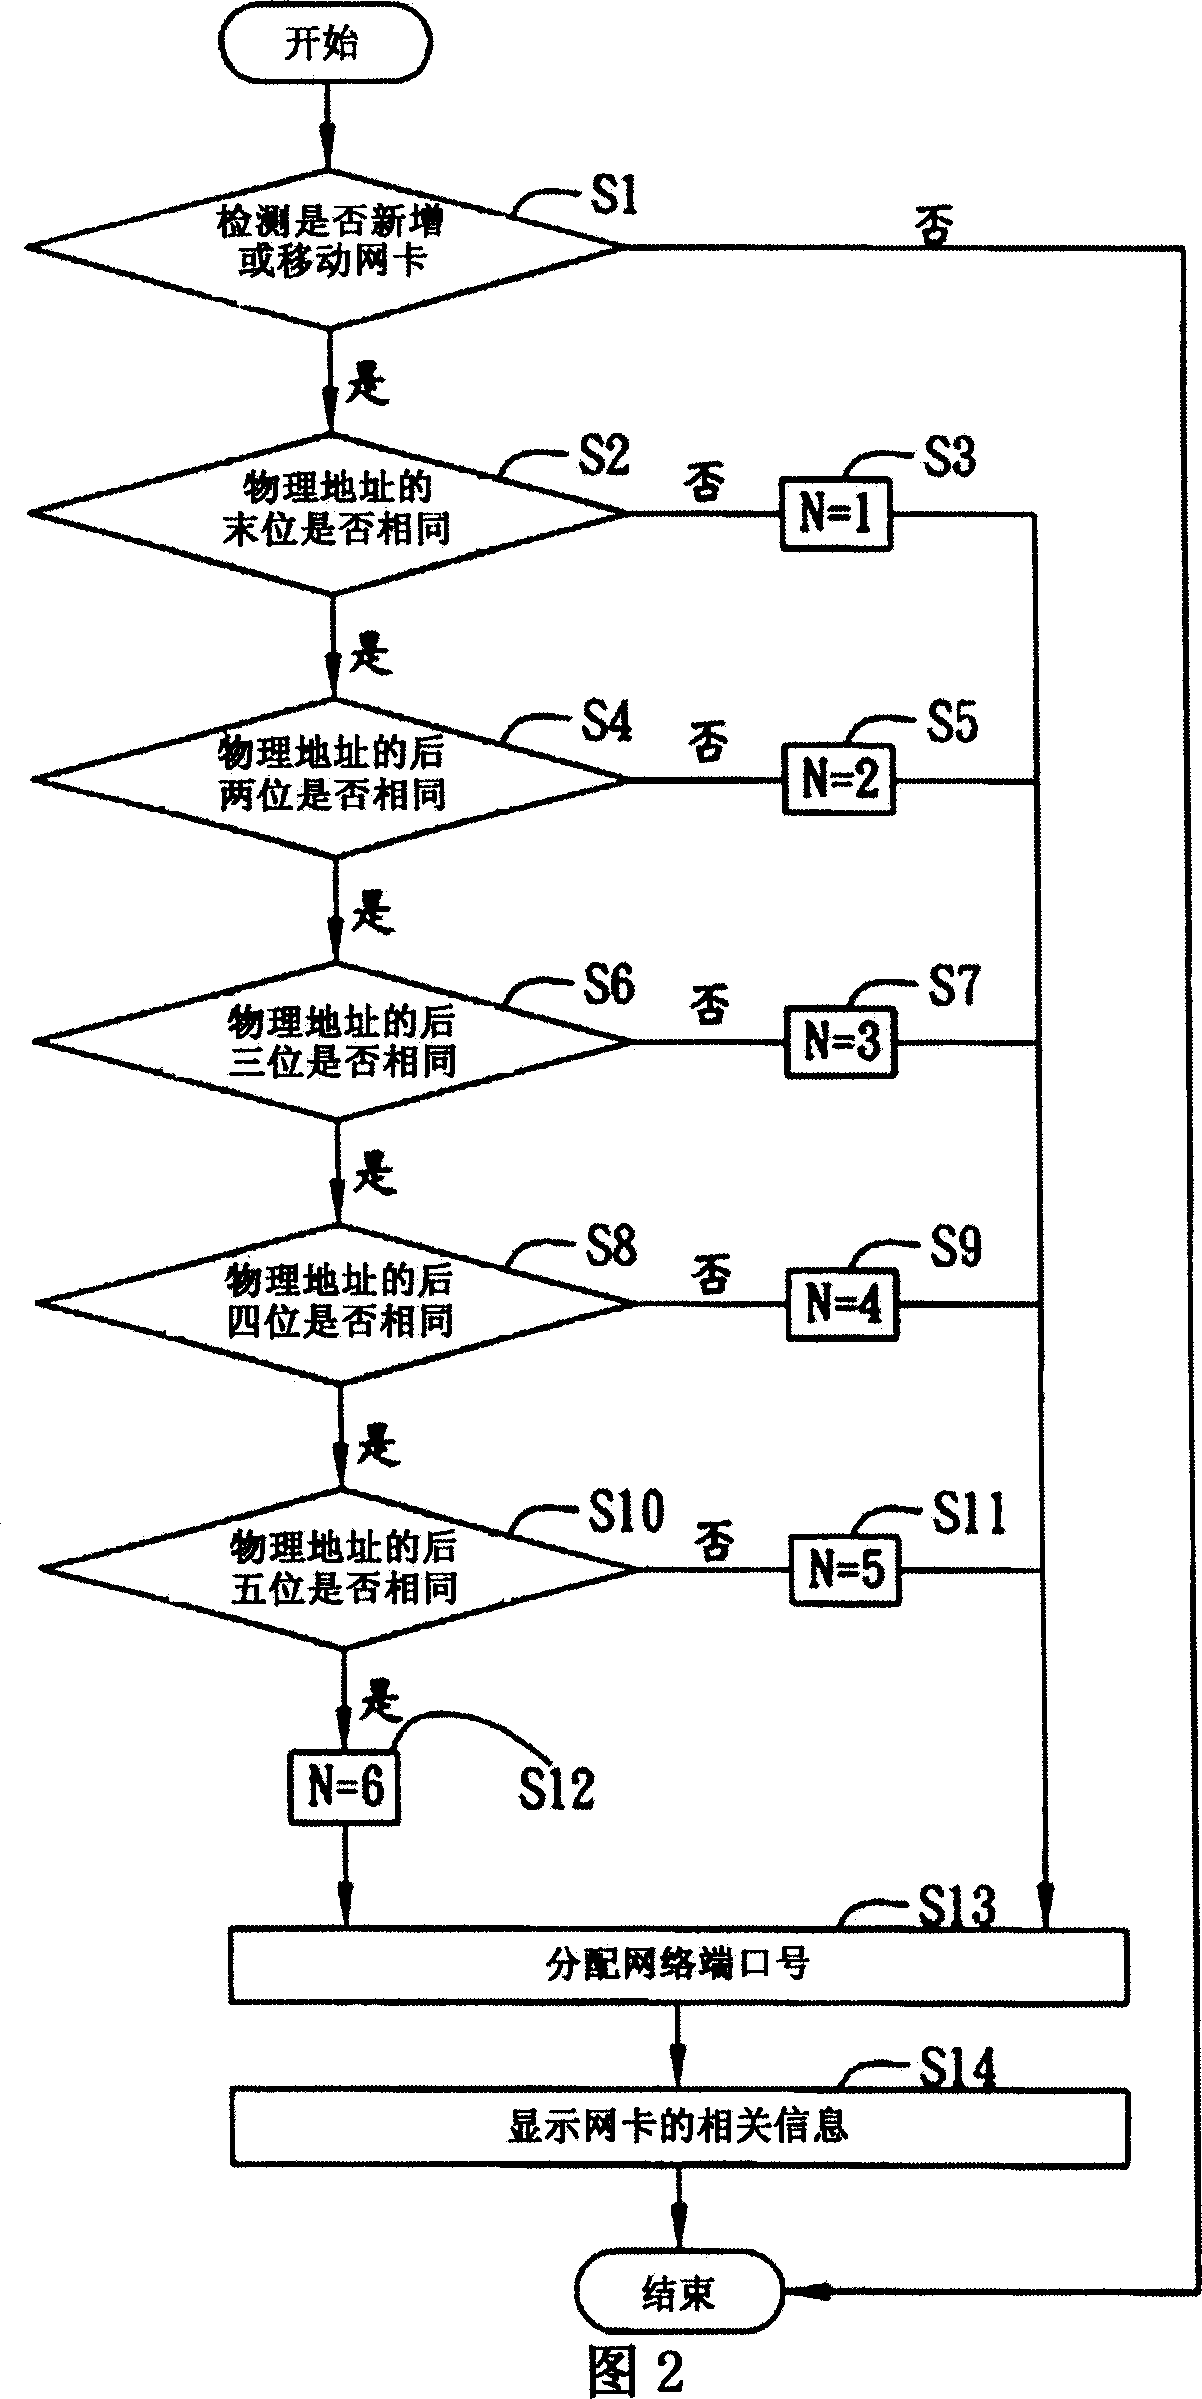 Network card automatic configuration system and method